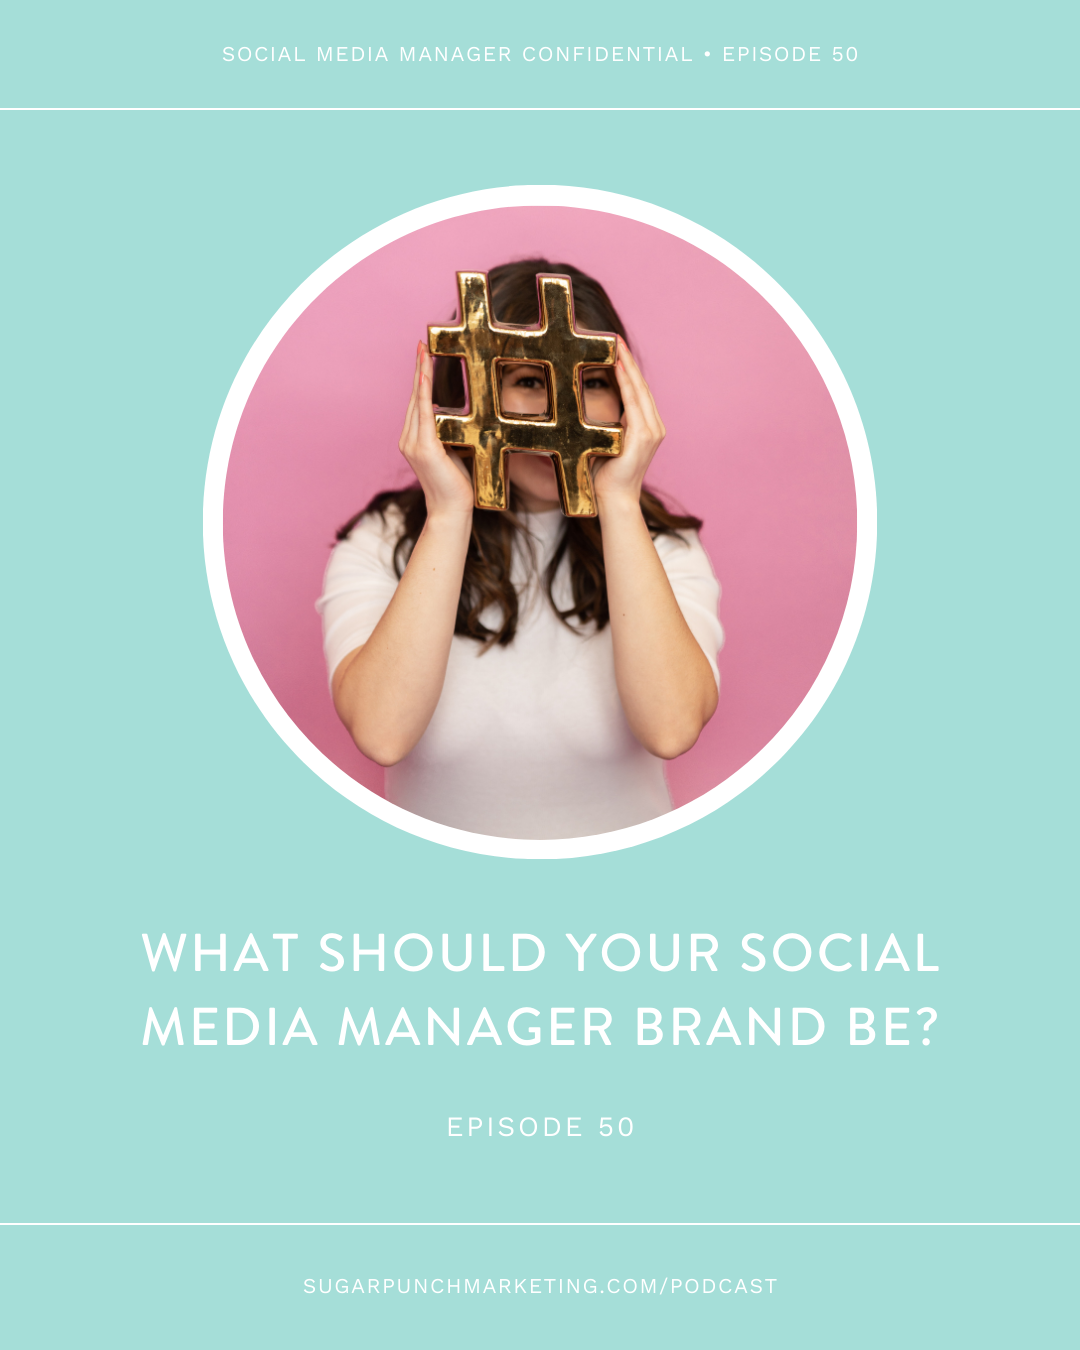 What Should Your Social Media Manager Brand Be?